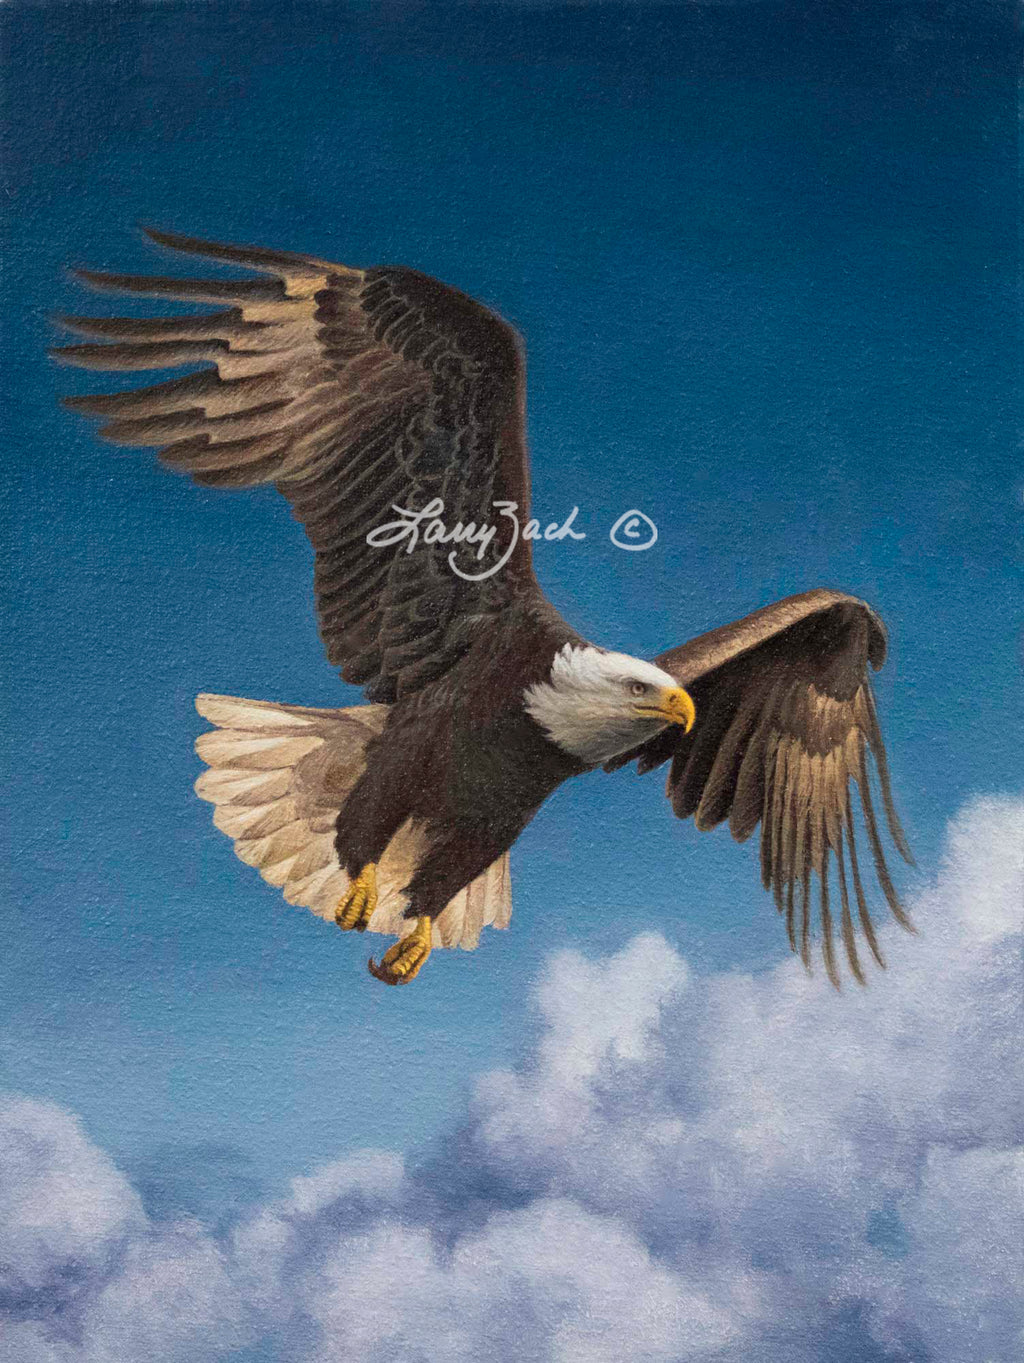 Flying HIgh – Bald Eagle by Larry Zach